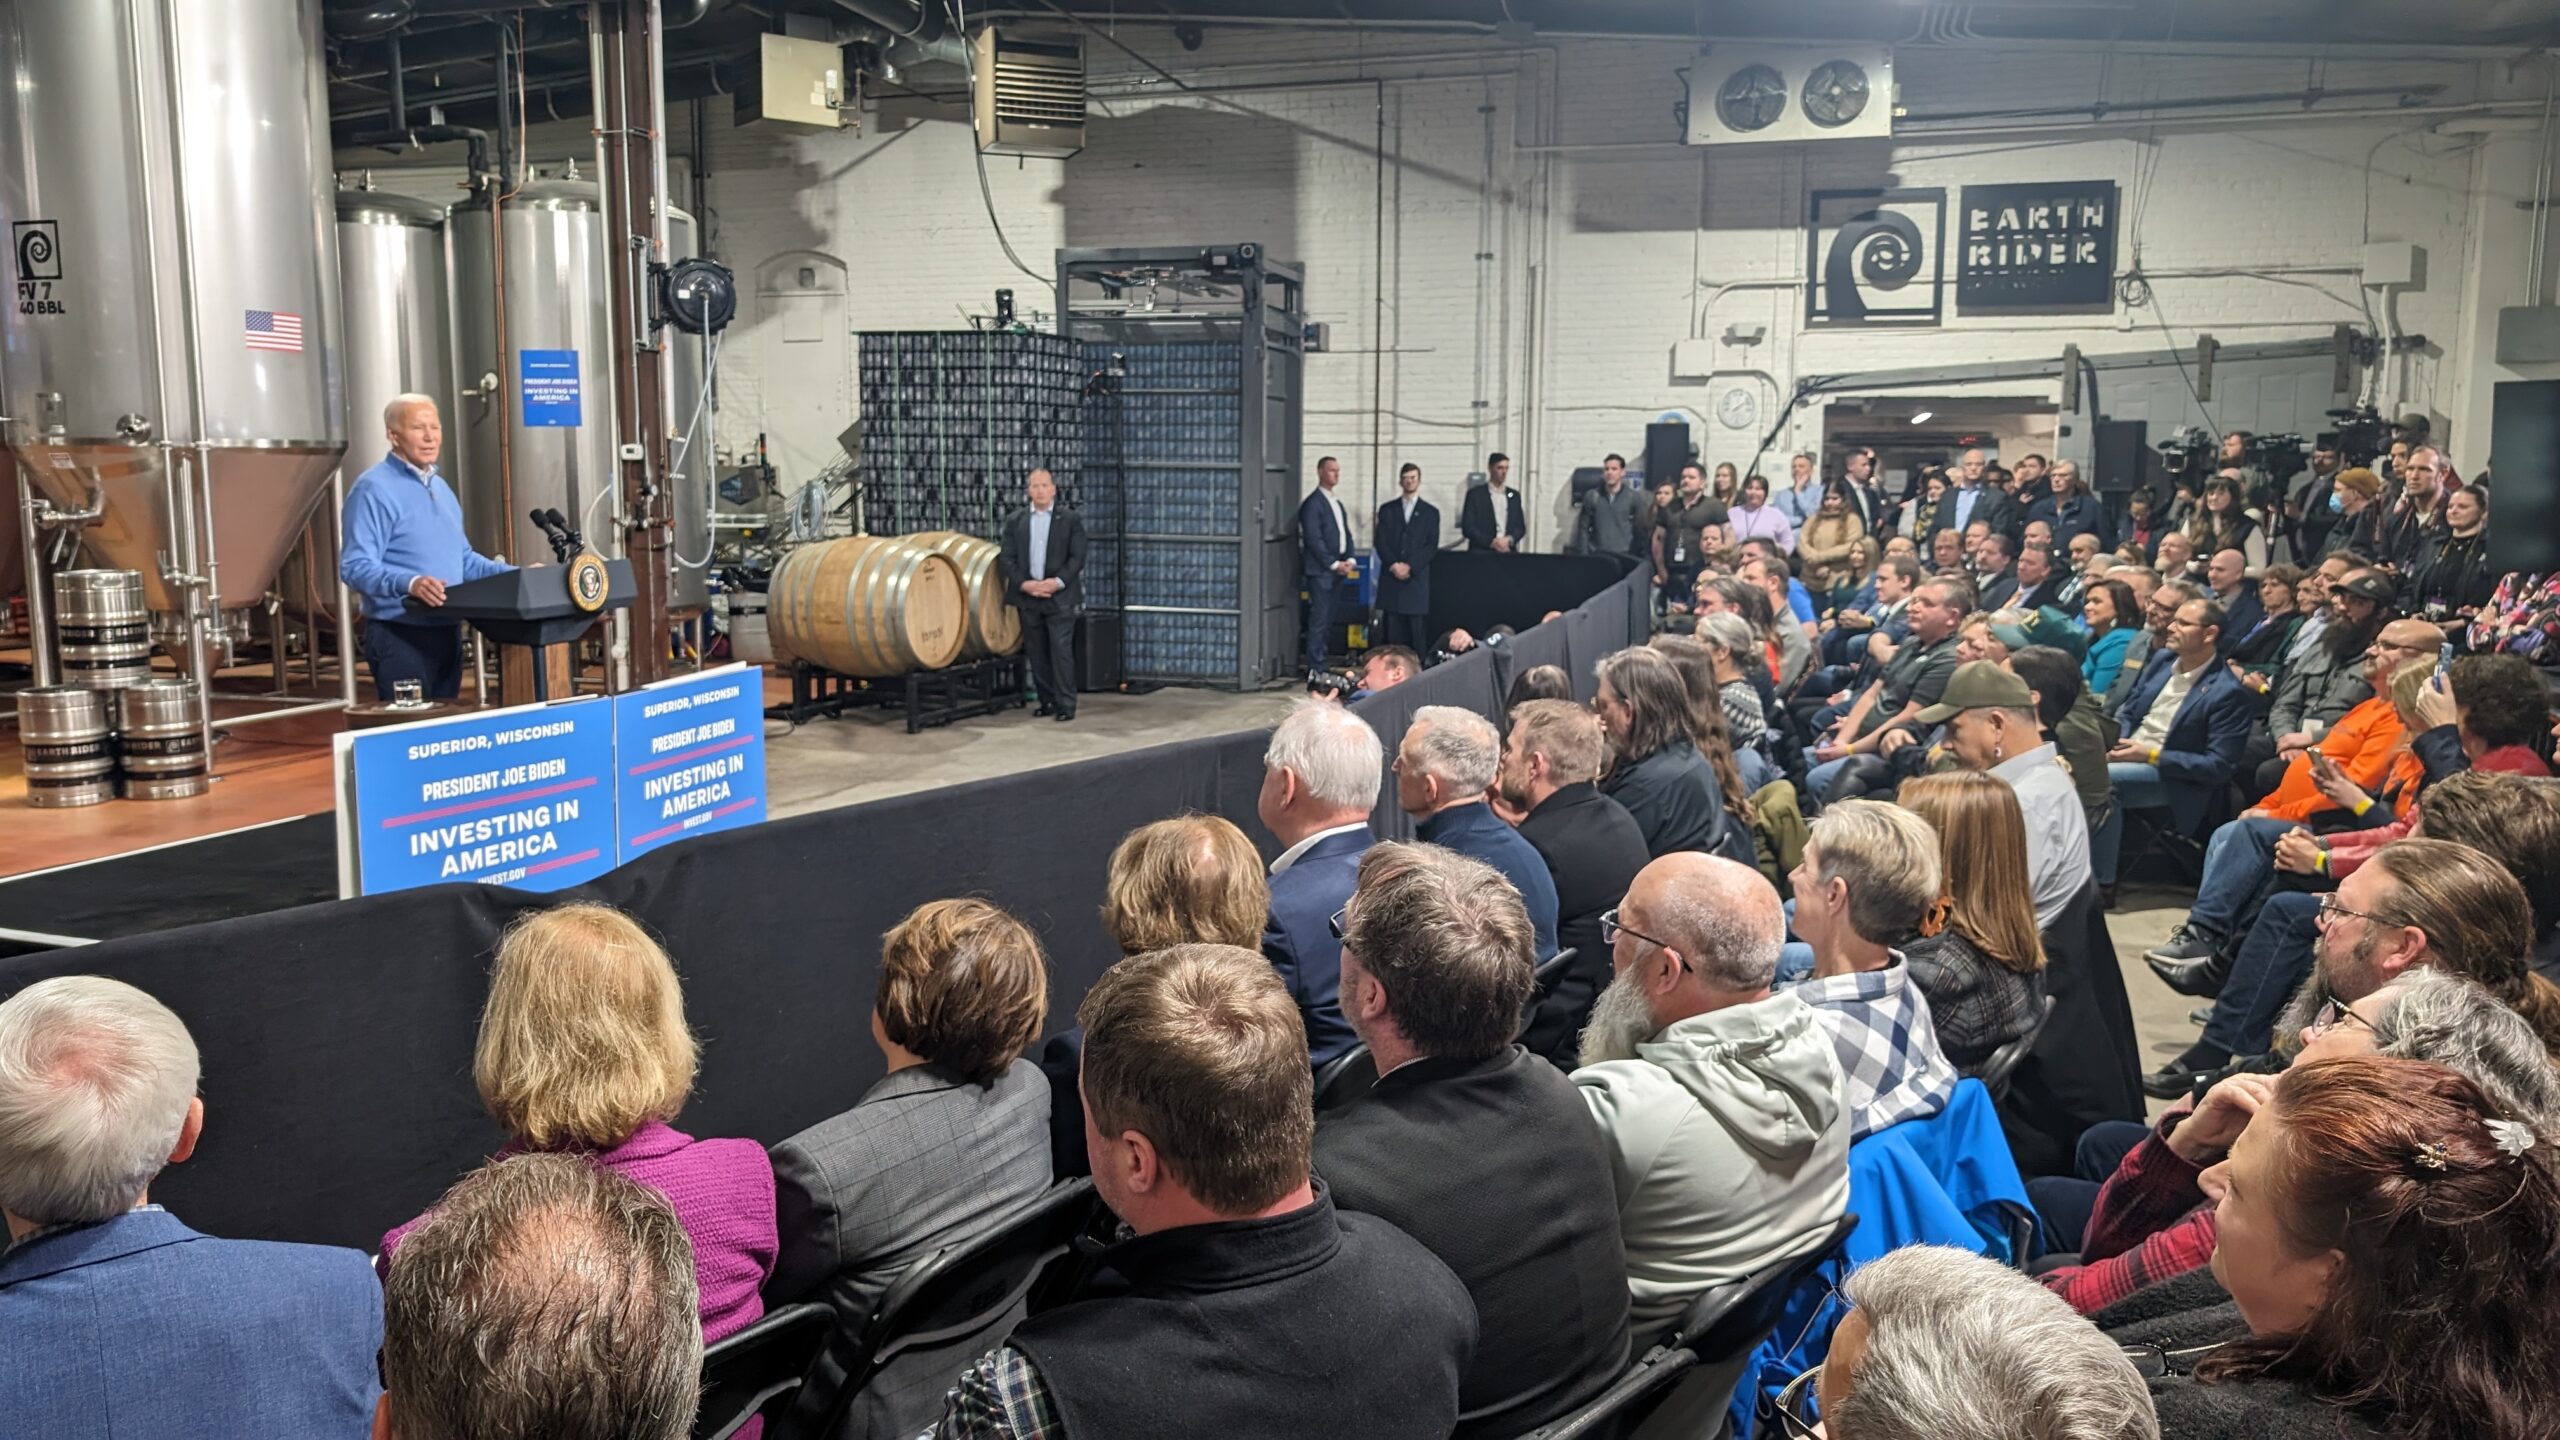 President Biden stands at a podium and speaks to a seated crowd. Brewing equipment takes up the wall behind him.